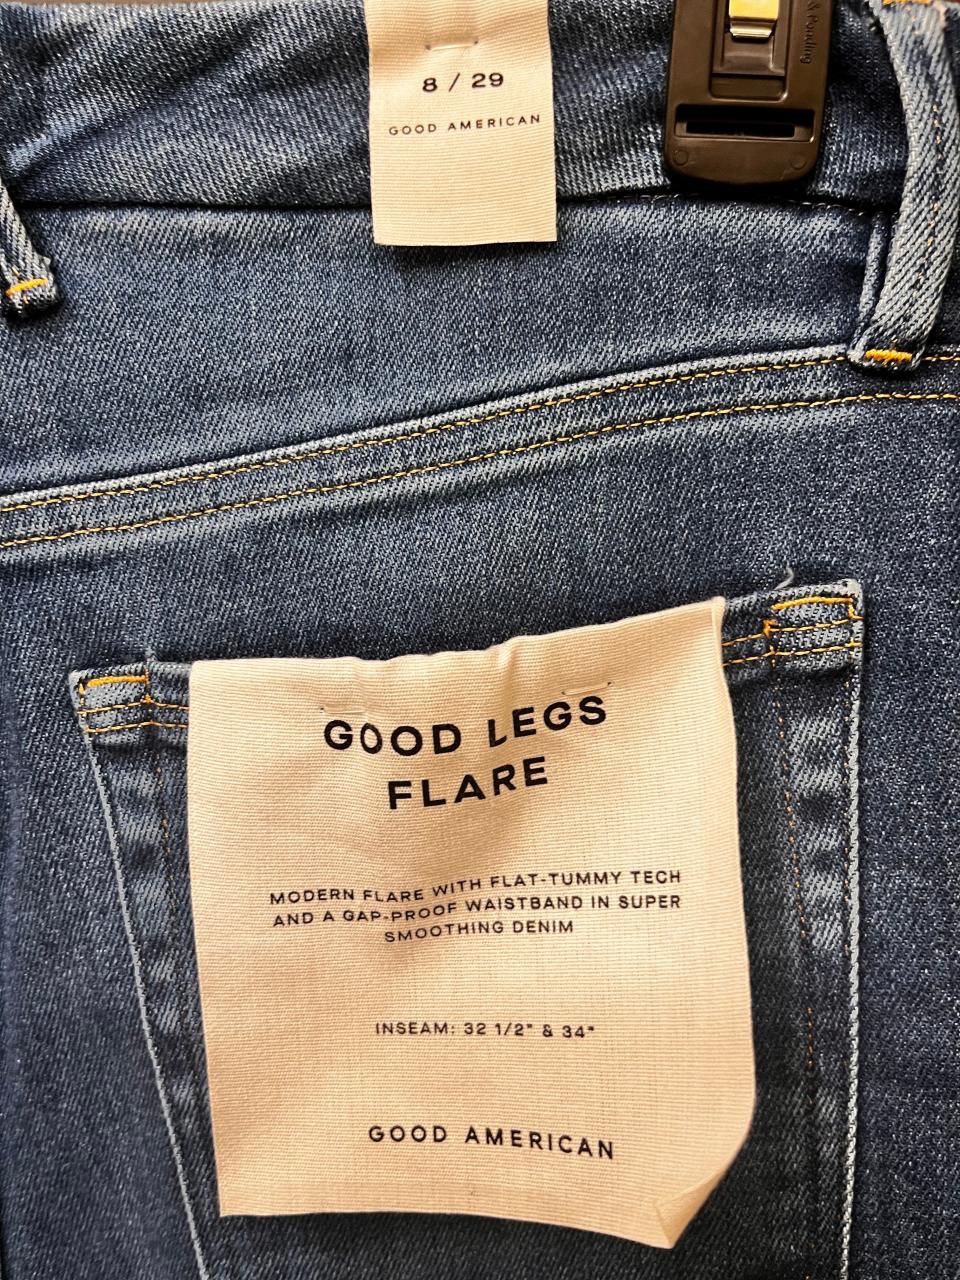 A close-up of the back of Good American's jeans.